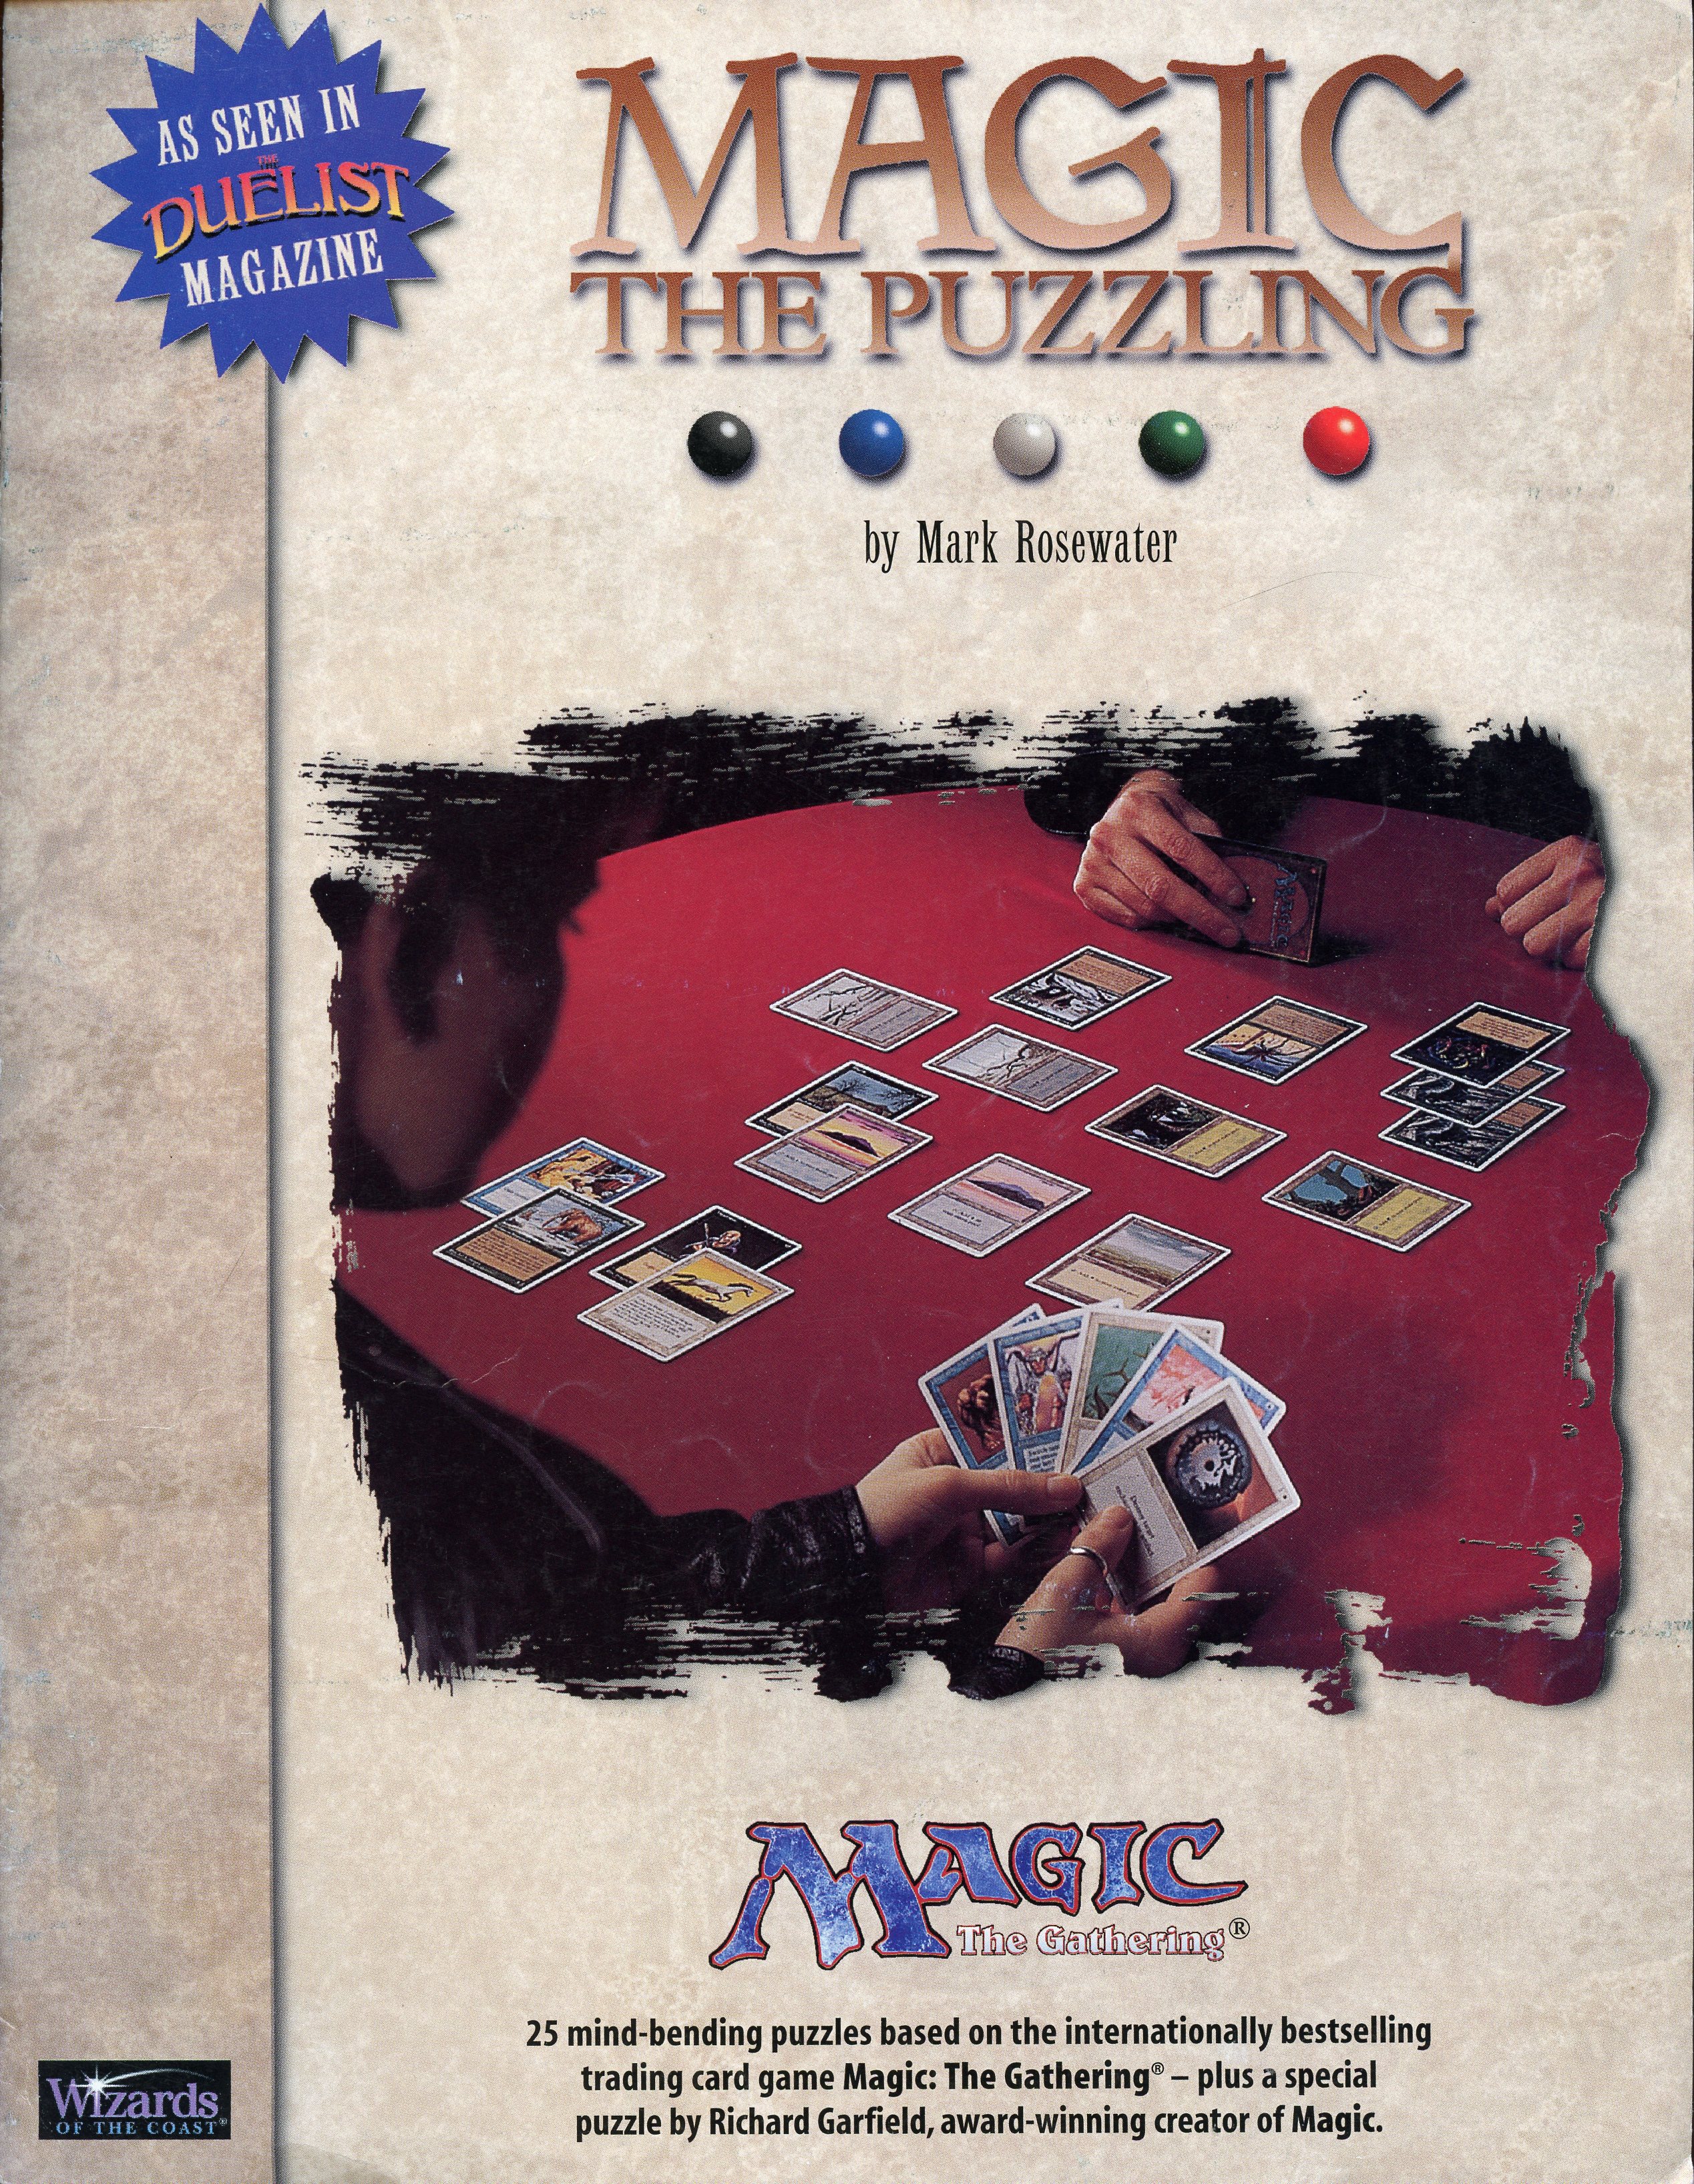 Magic The Puzzling Preview